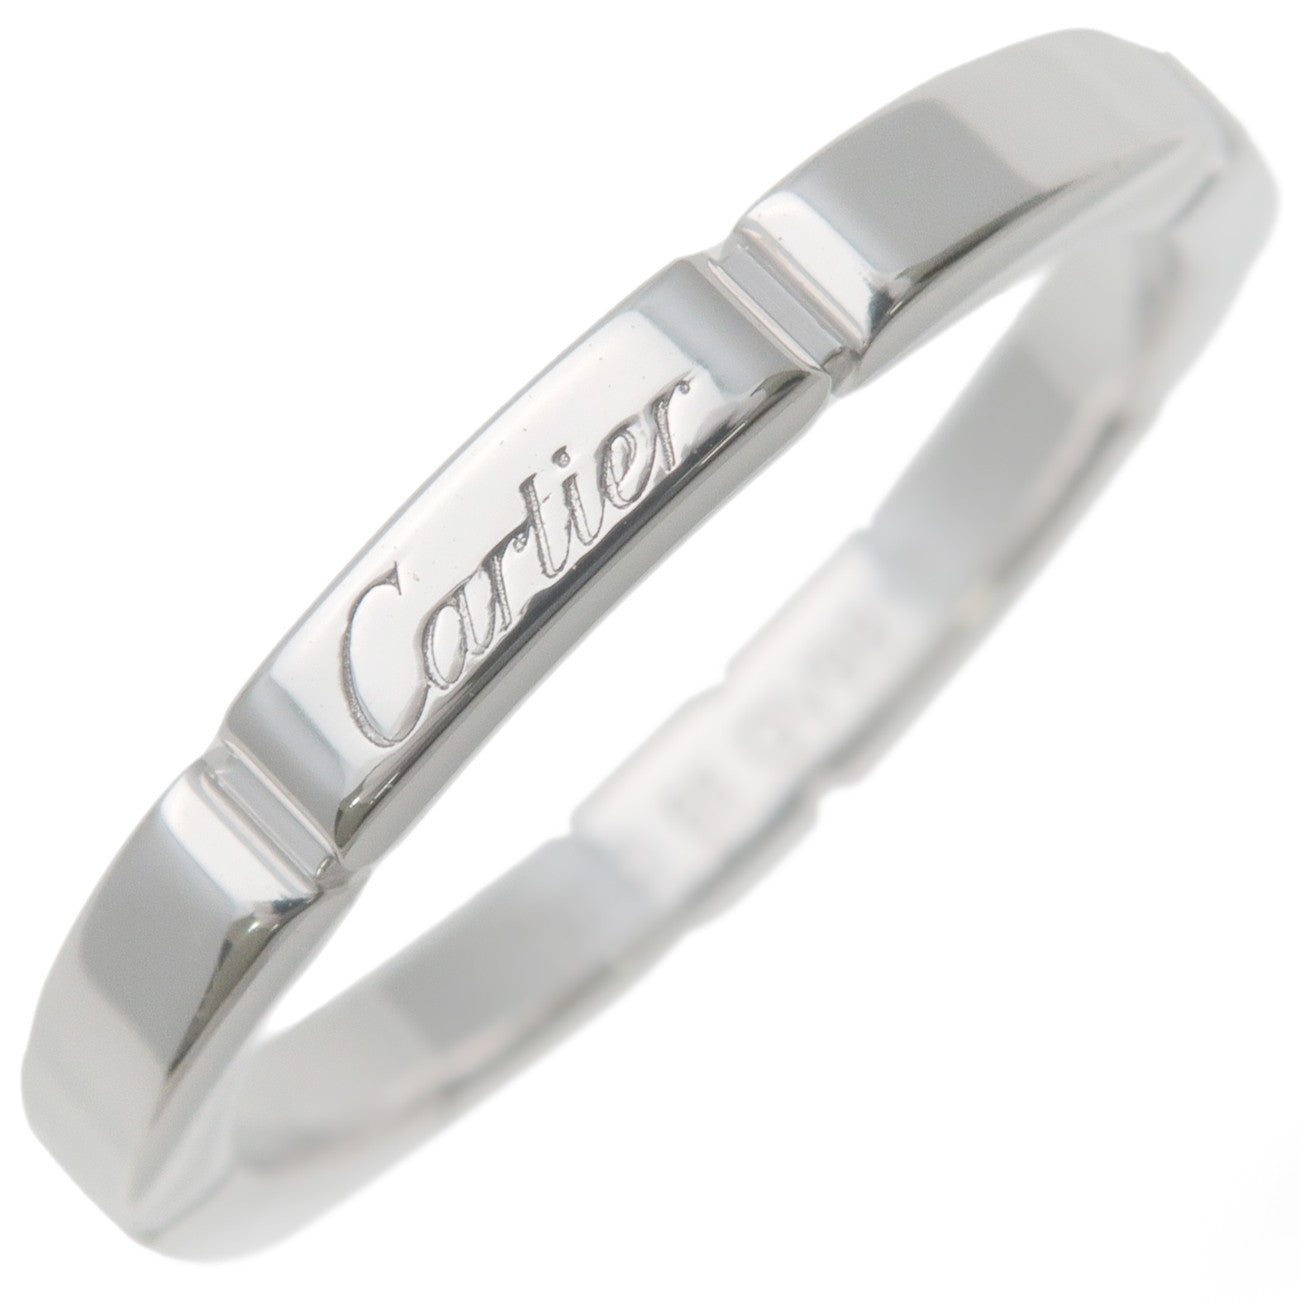 Cartier-Maillon-Panthère-Ring-K18-750WG-White-Gold-#55-US7.5